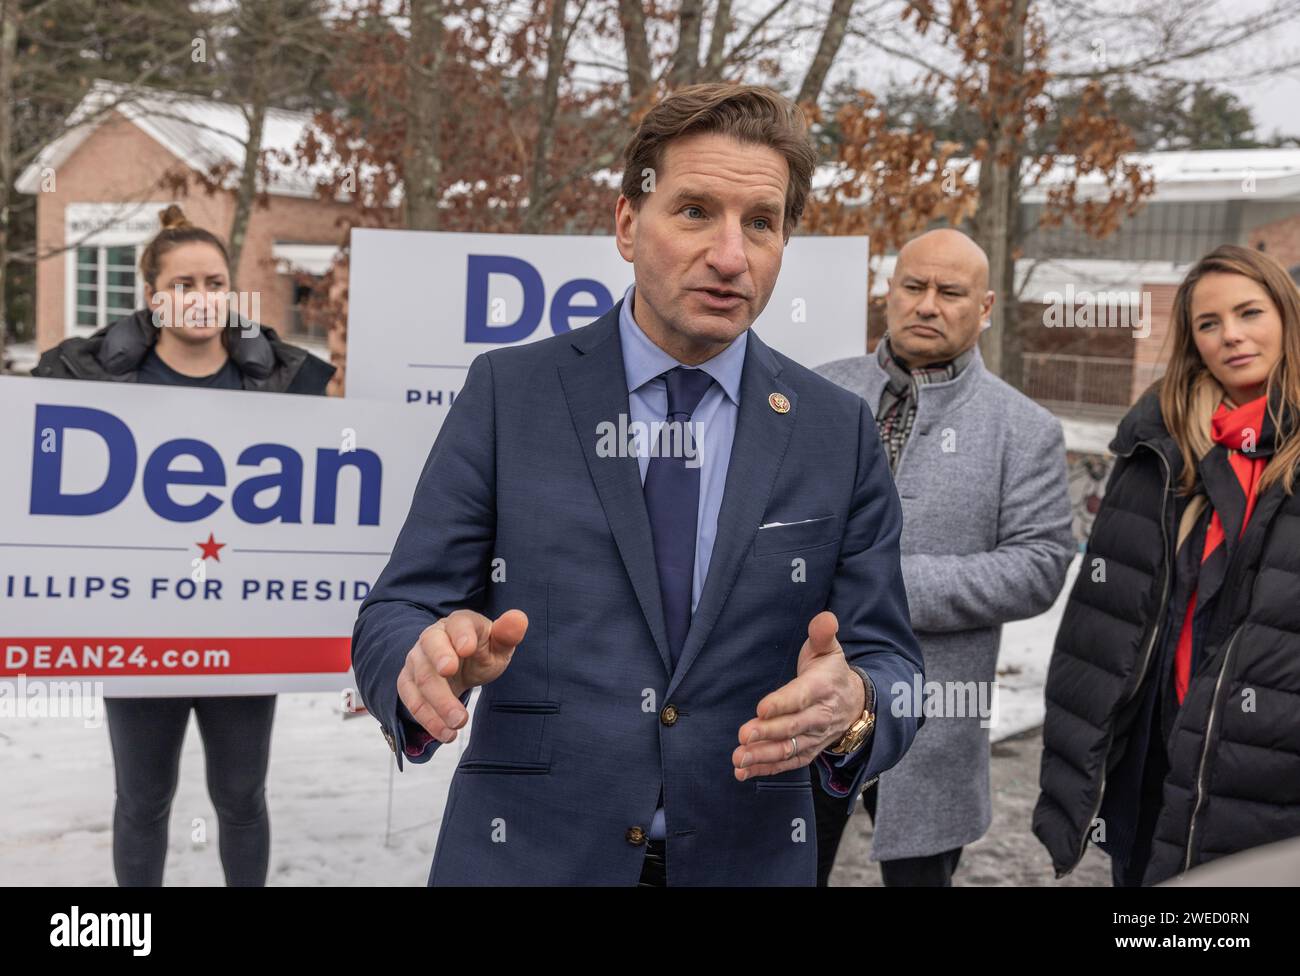 NASHUA, N.H. – January 23, 2024: Democratic presidential candidate Dean Phillips campaigns on New Hampshire primary election day. Stock Photo